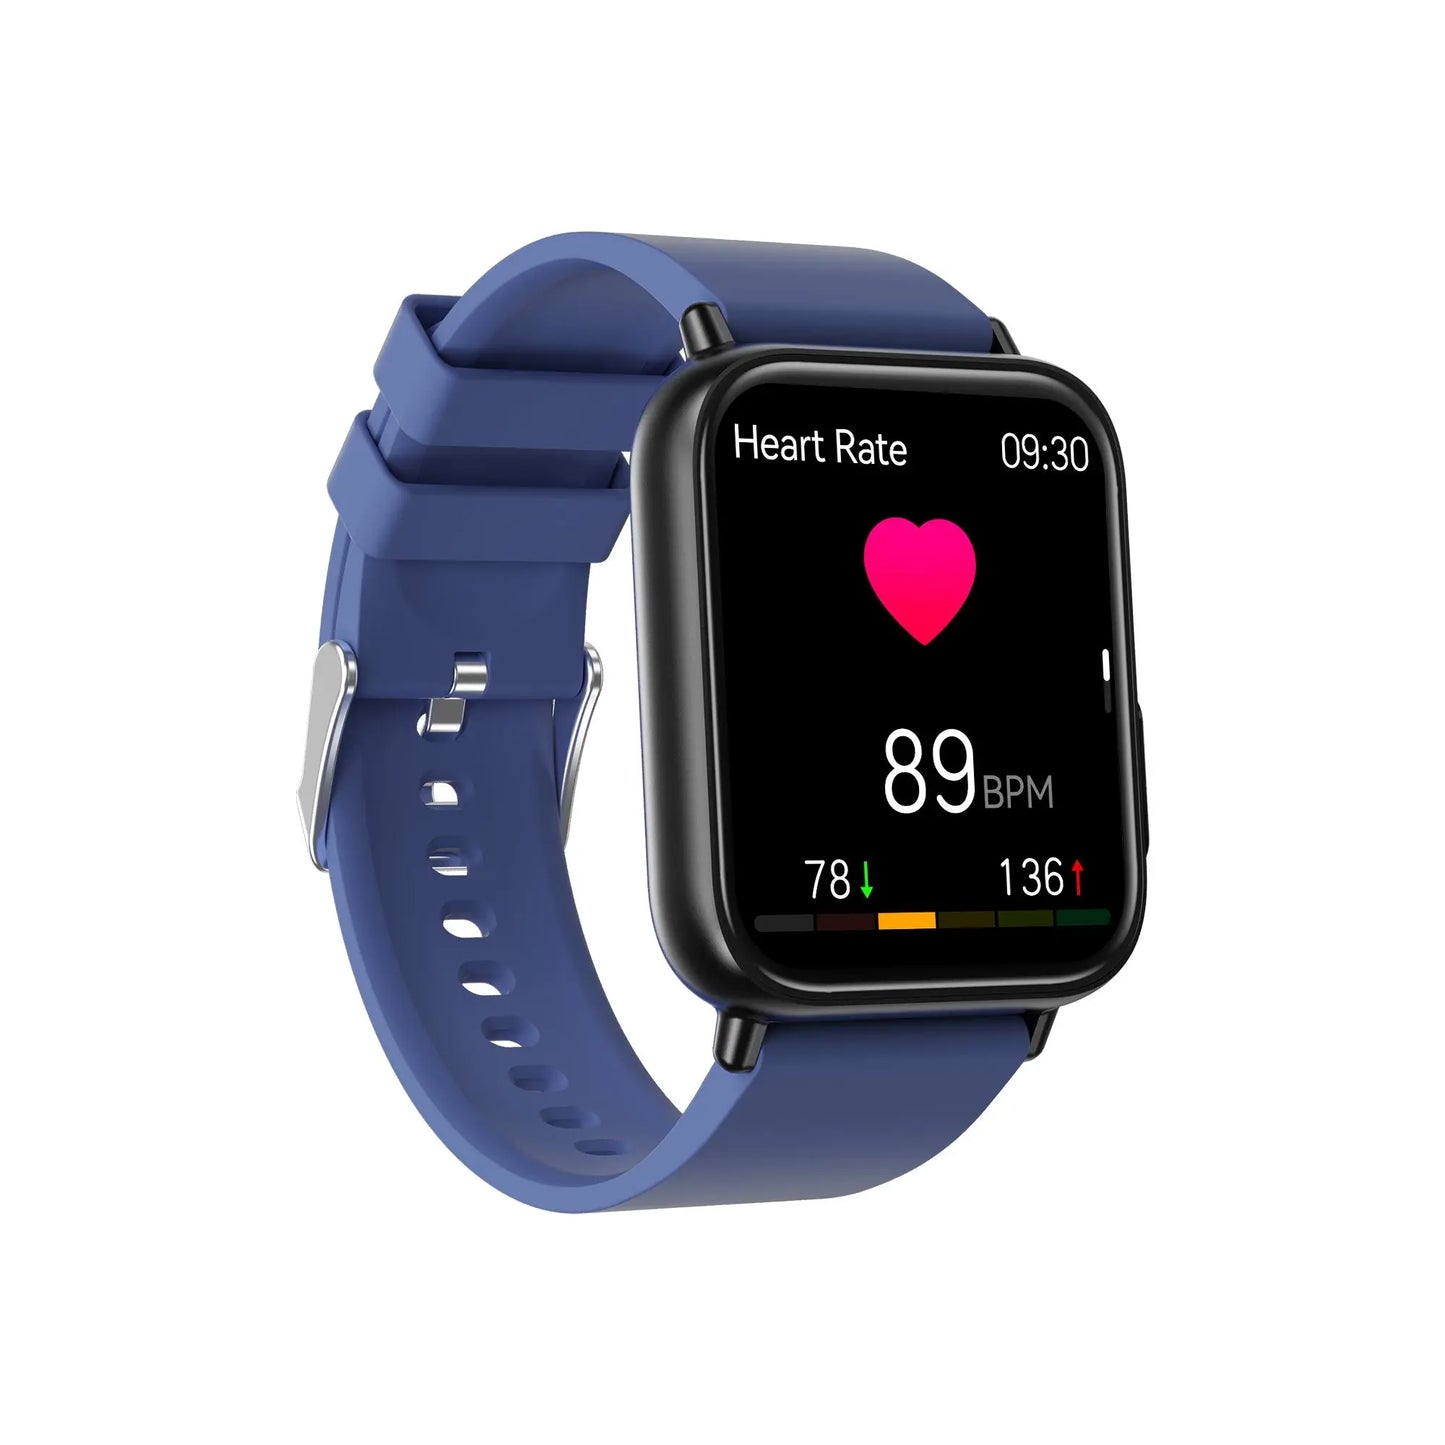 New Upgrade Fitvii™ Powerful Smartwatch ECG with Heart Rate Blood Pressure Monitor+Blood Glucose Monitor fitvii